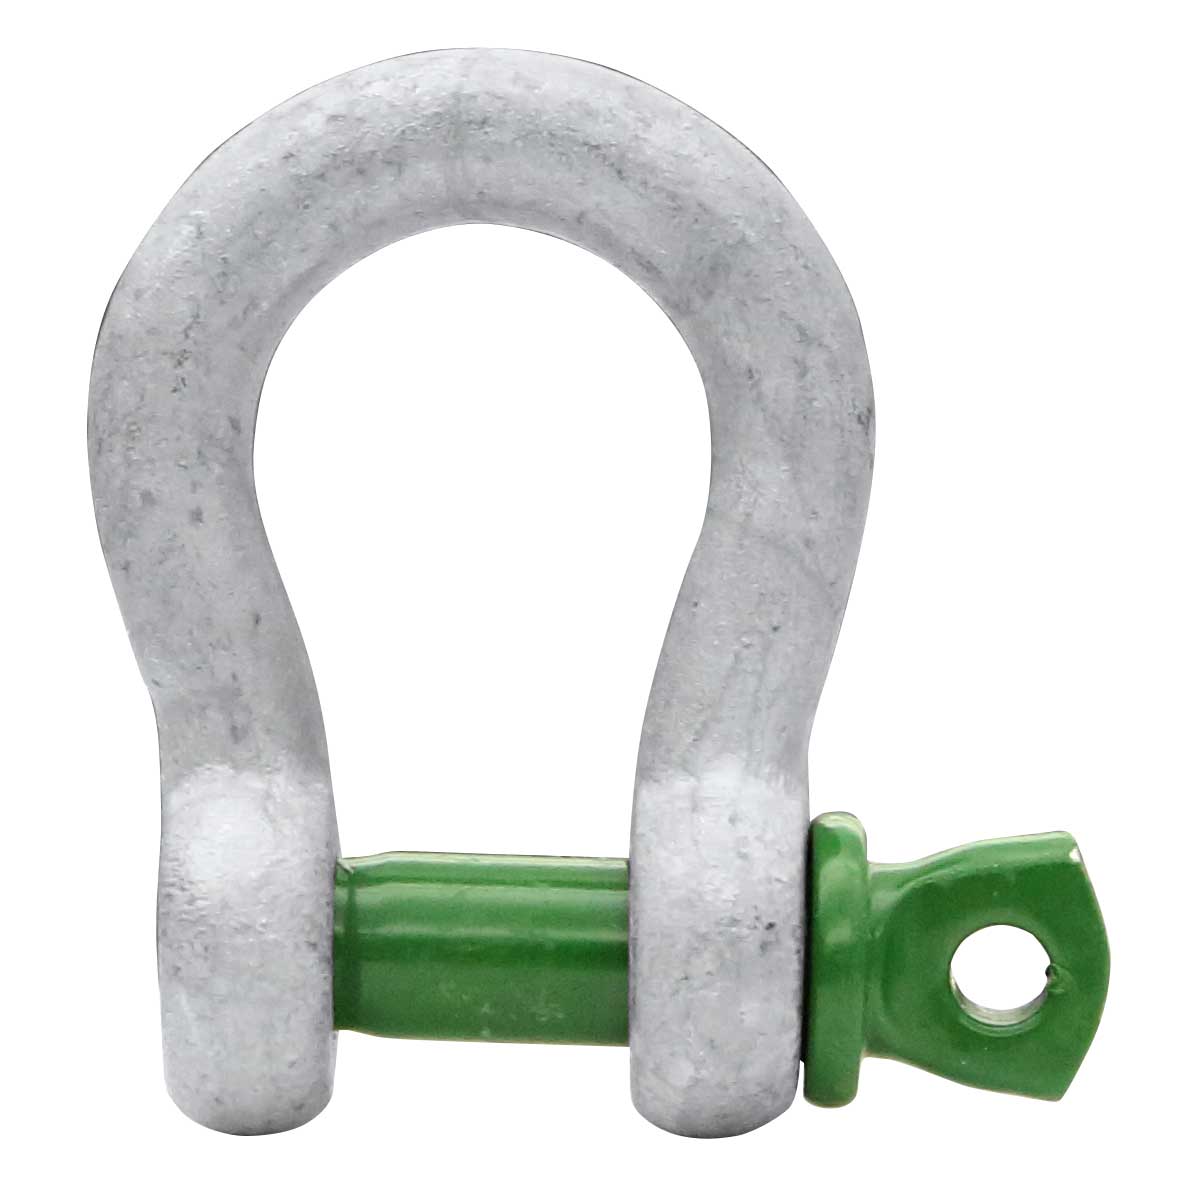 1/4" Van Beest Green Pin® Screw Pin Anchor Shackle | G-4161 - 0.5 Ton primary image